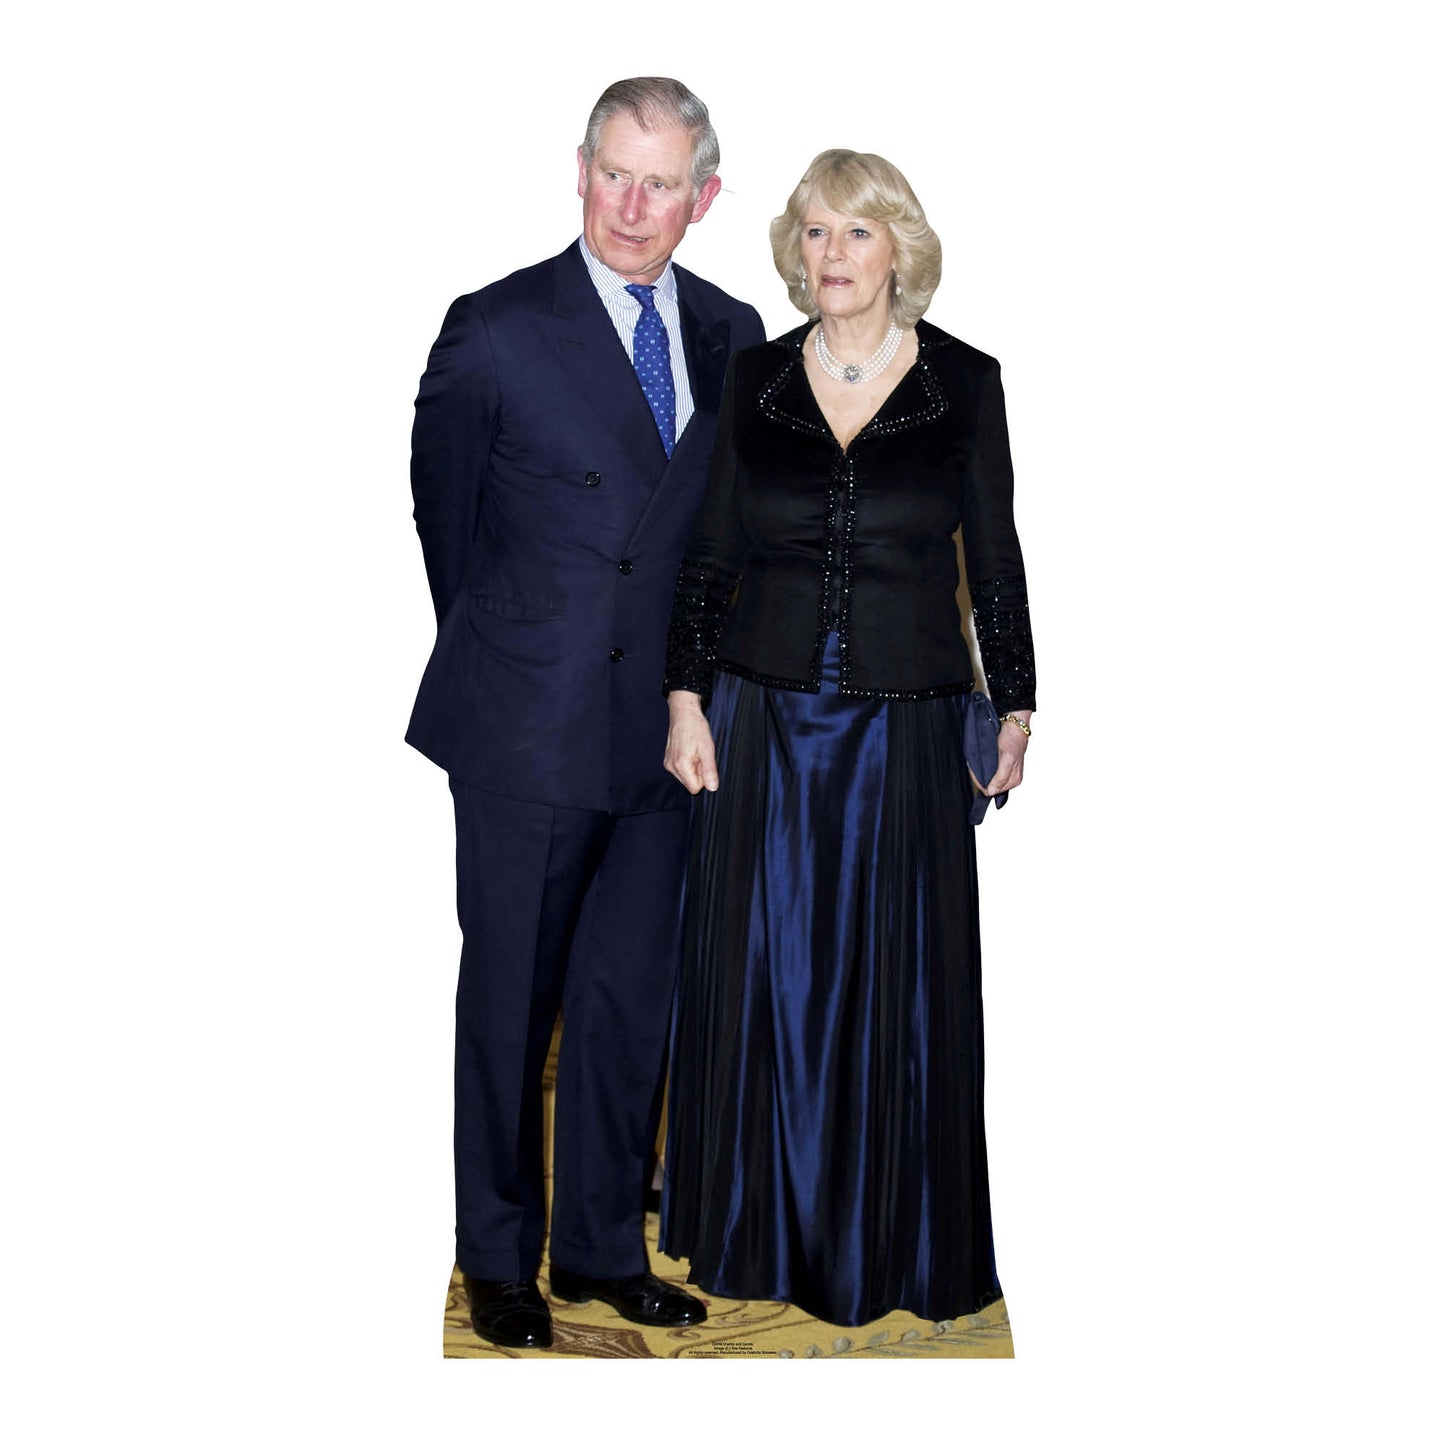 King Charles and Camilla The Queen Consort Cardboard Cutout